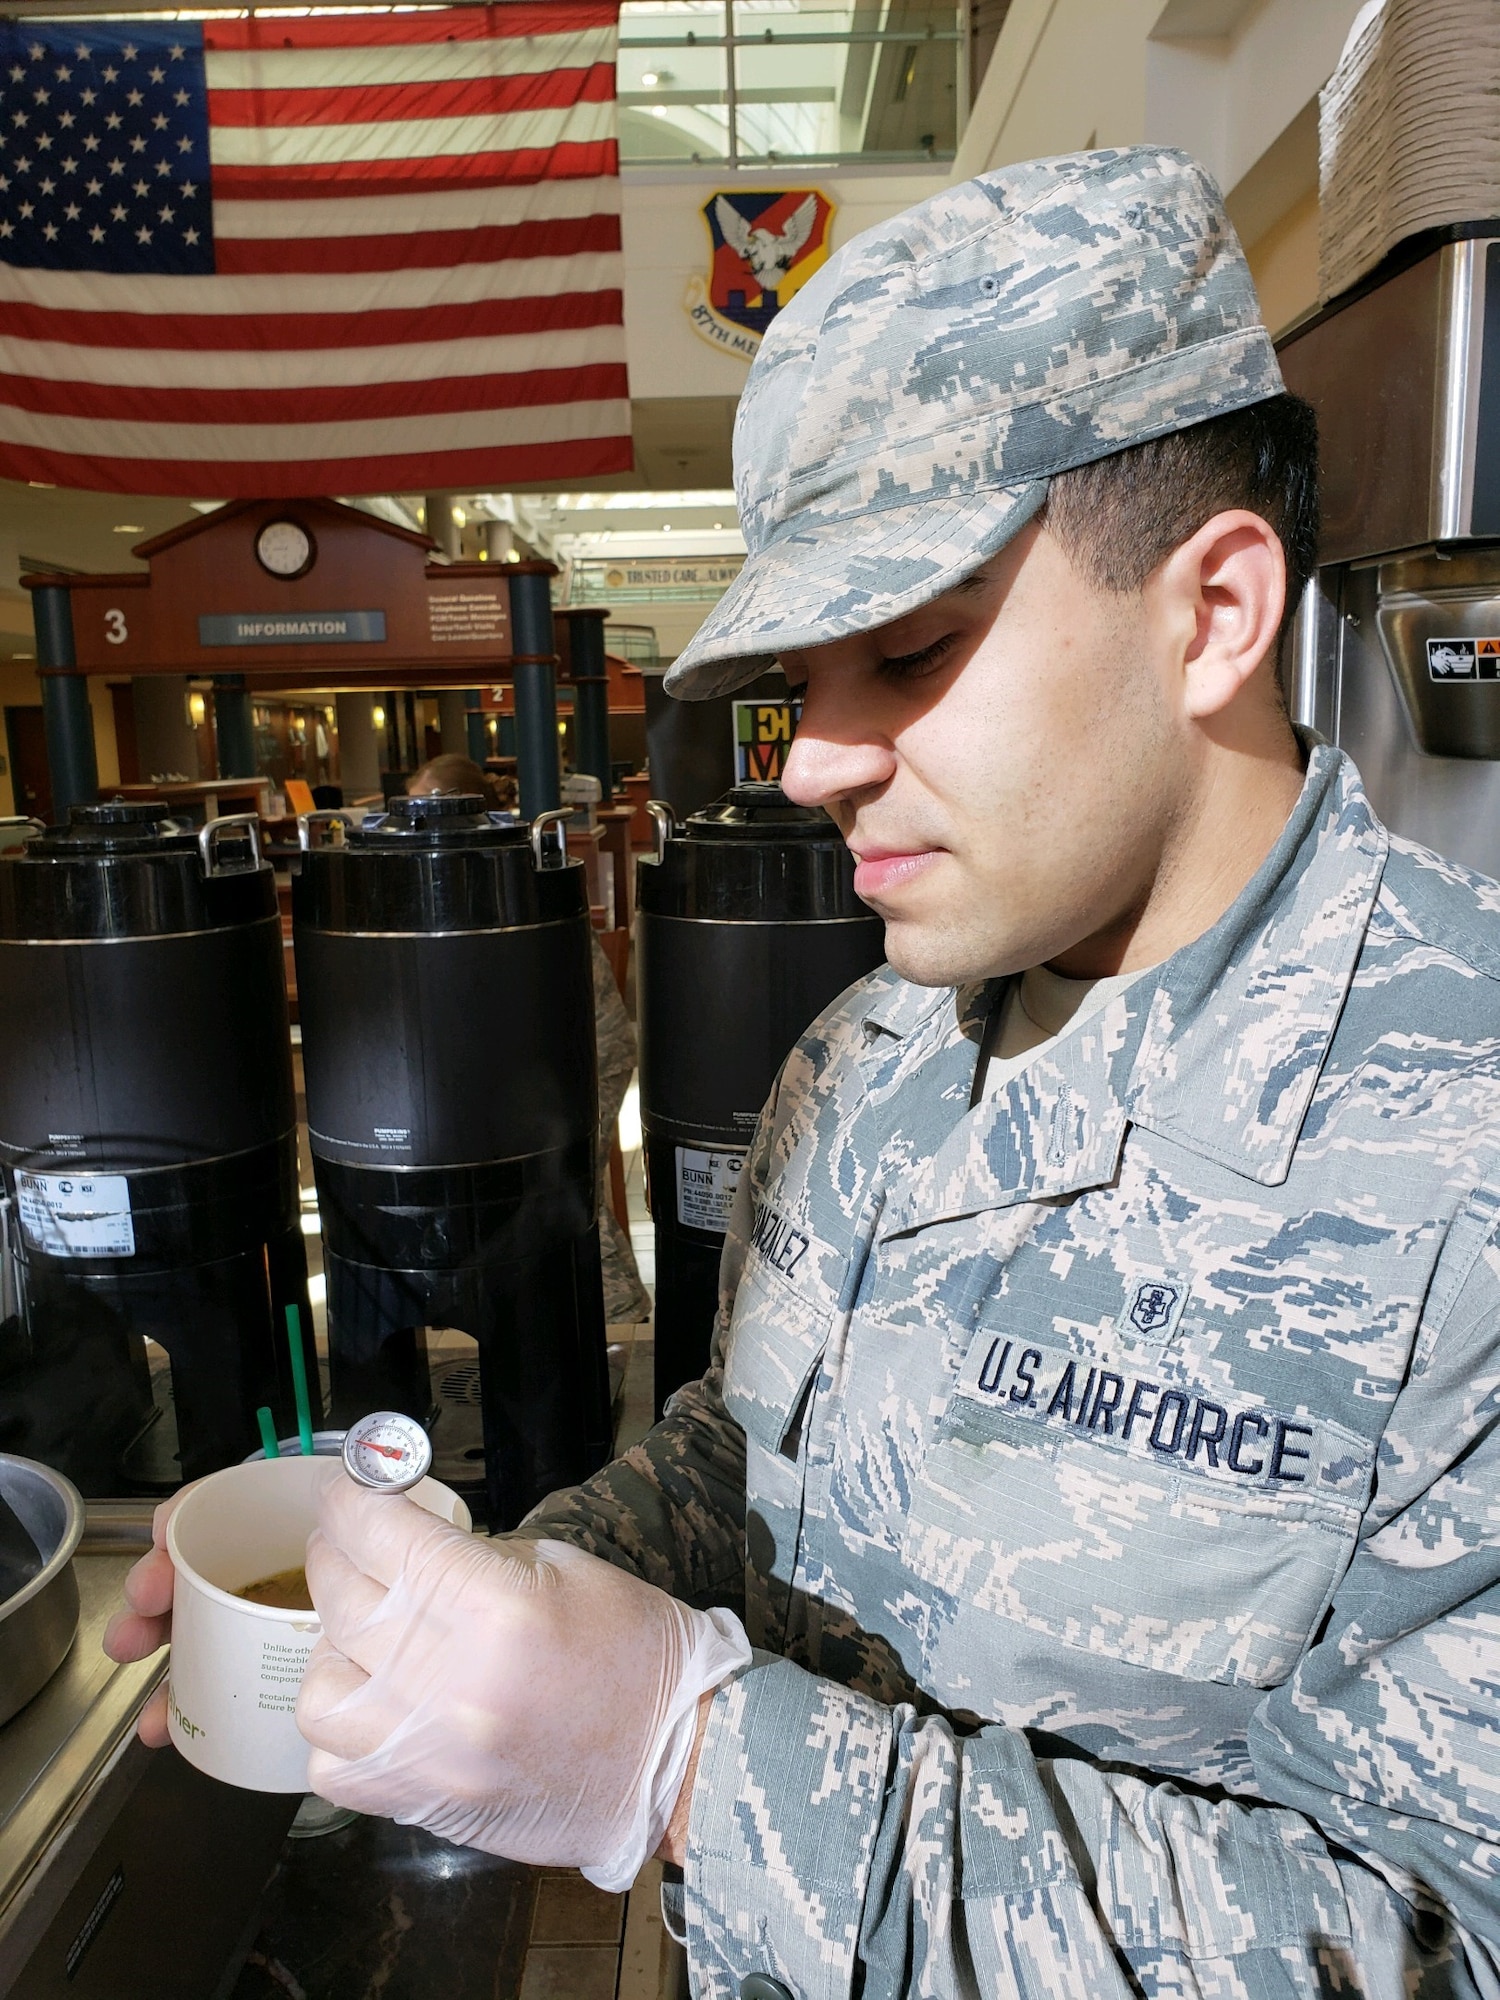 Public Health Technician SrA Nicholas Gonzalez from the 87th MDG JB-MDL.
Observing food temperatures as part of a routine food facility inspection.